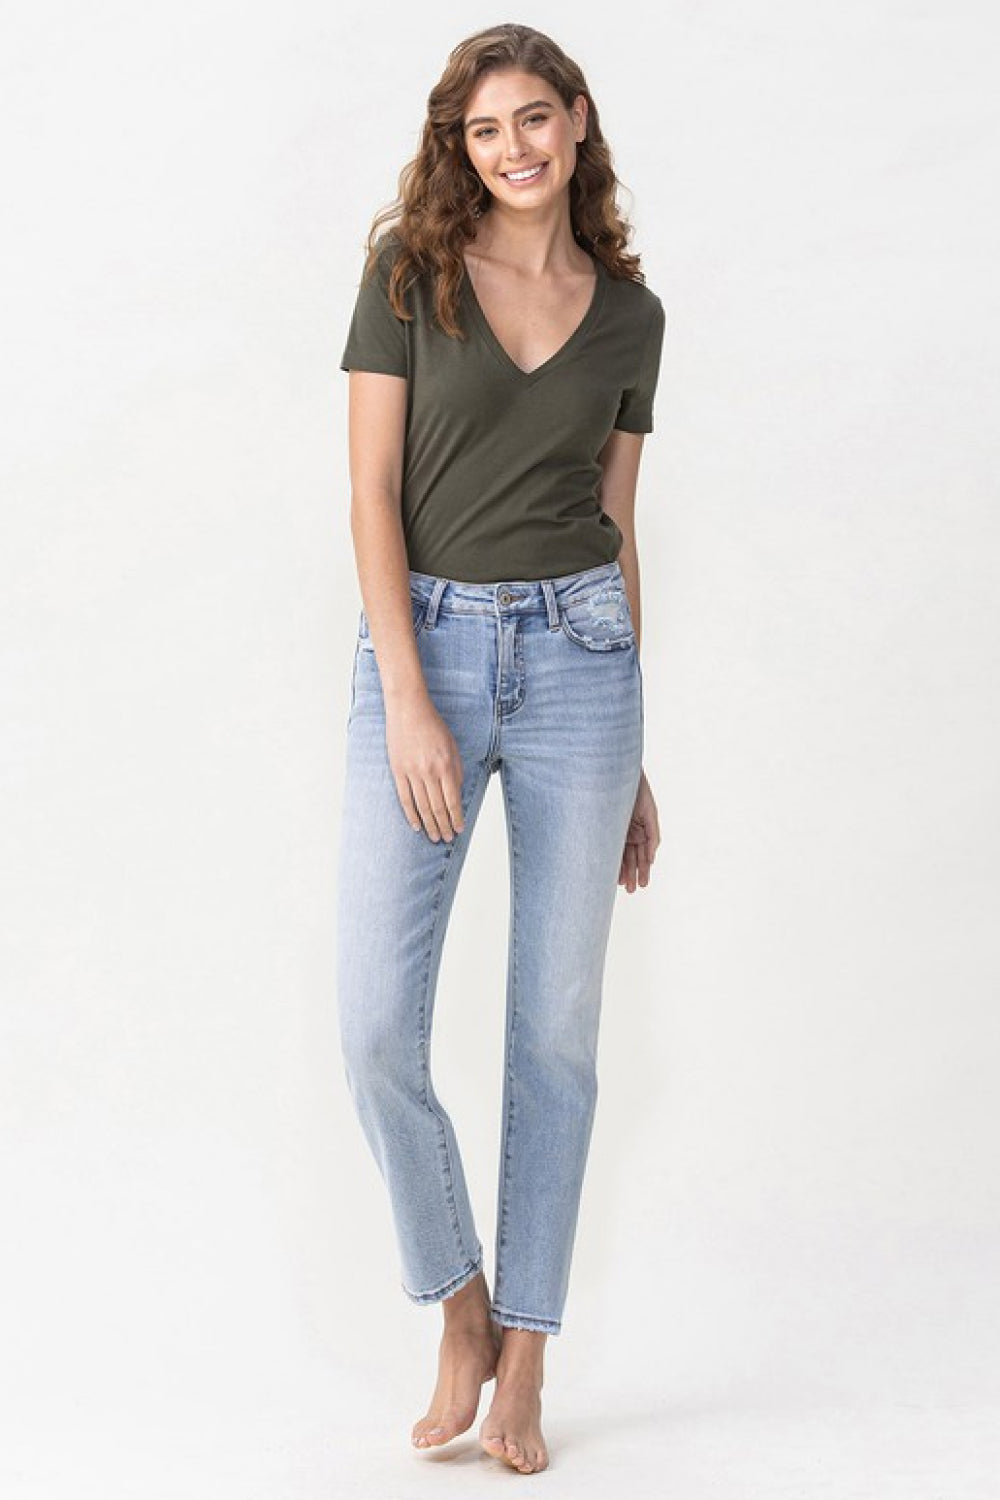 Lovervet Andrea Midrise Crop Straight Jeans - Online Only